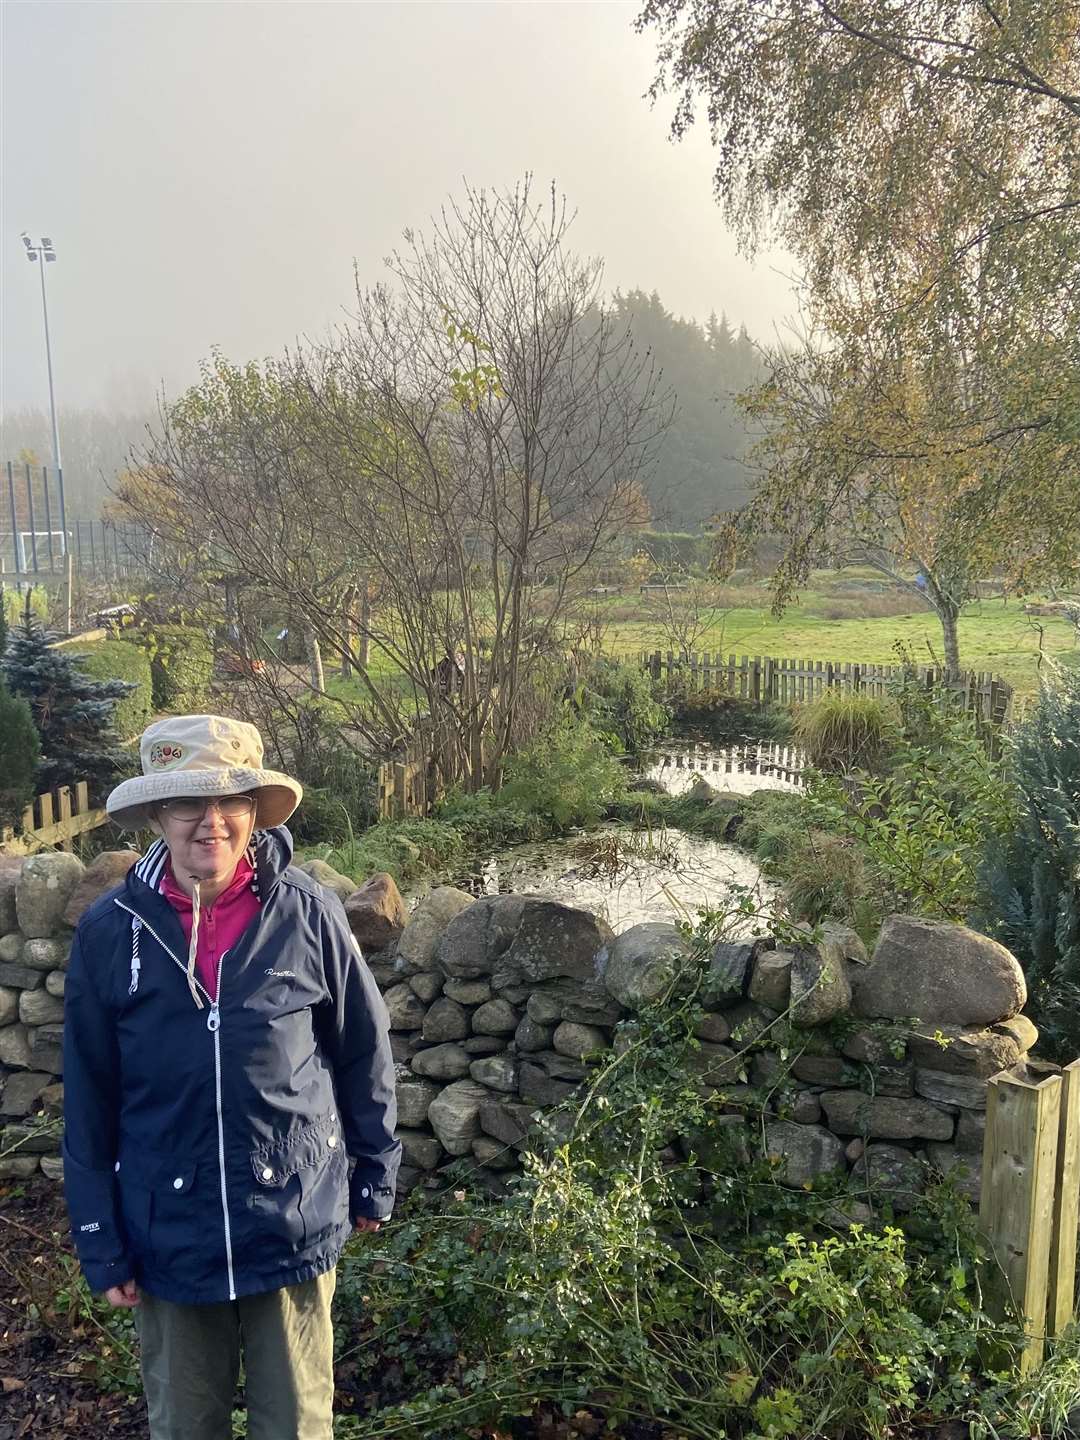 Carol with her ponds and beautiful stone wall.